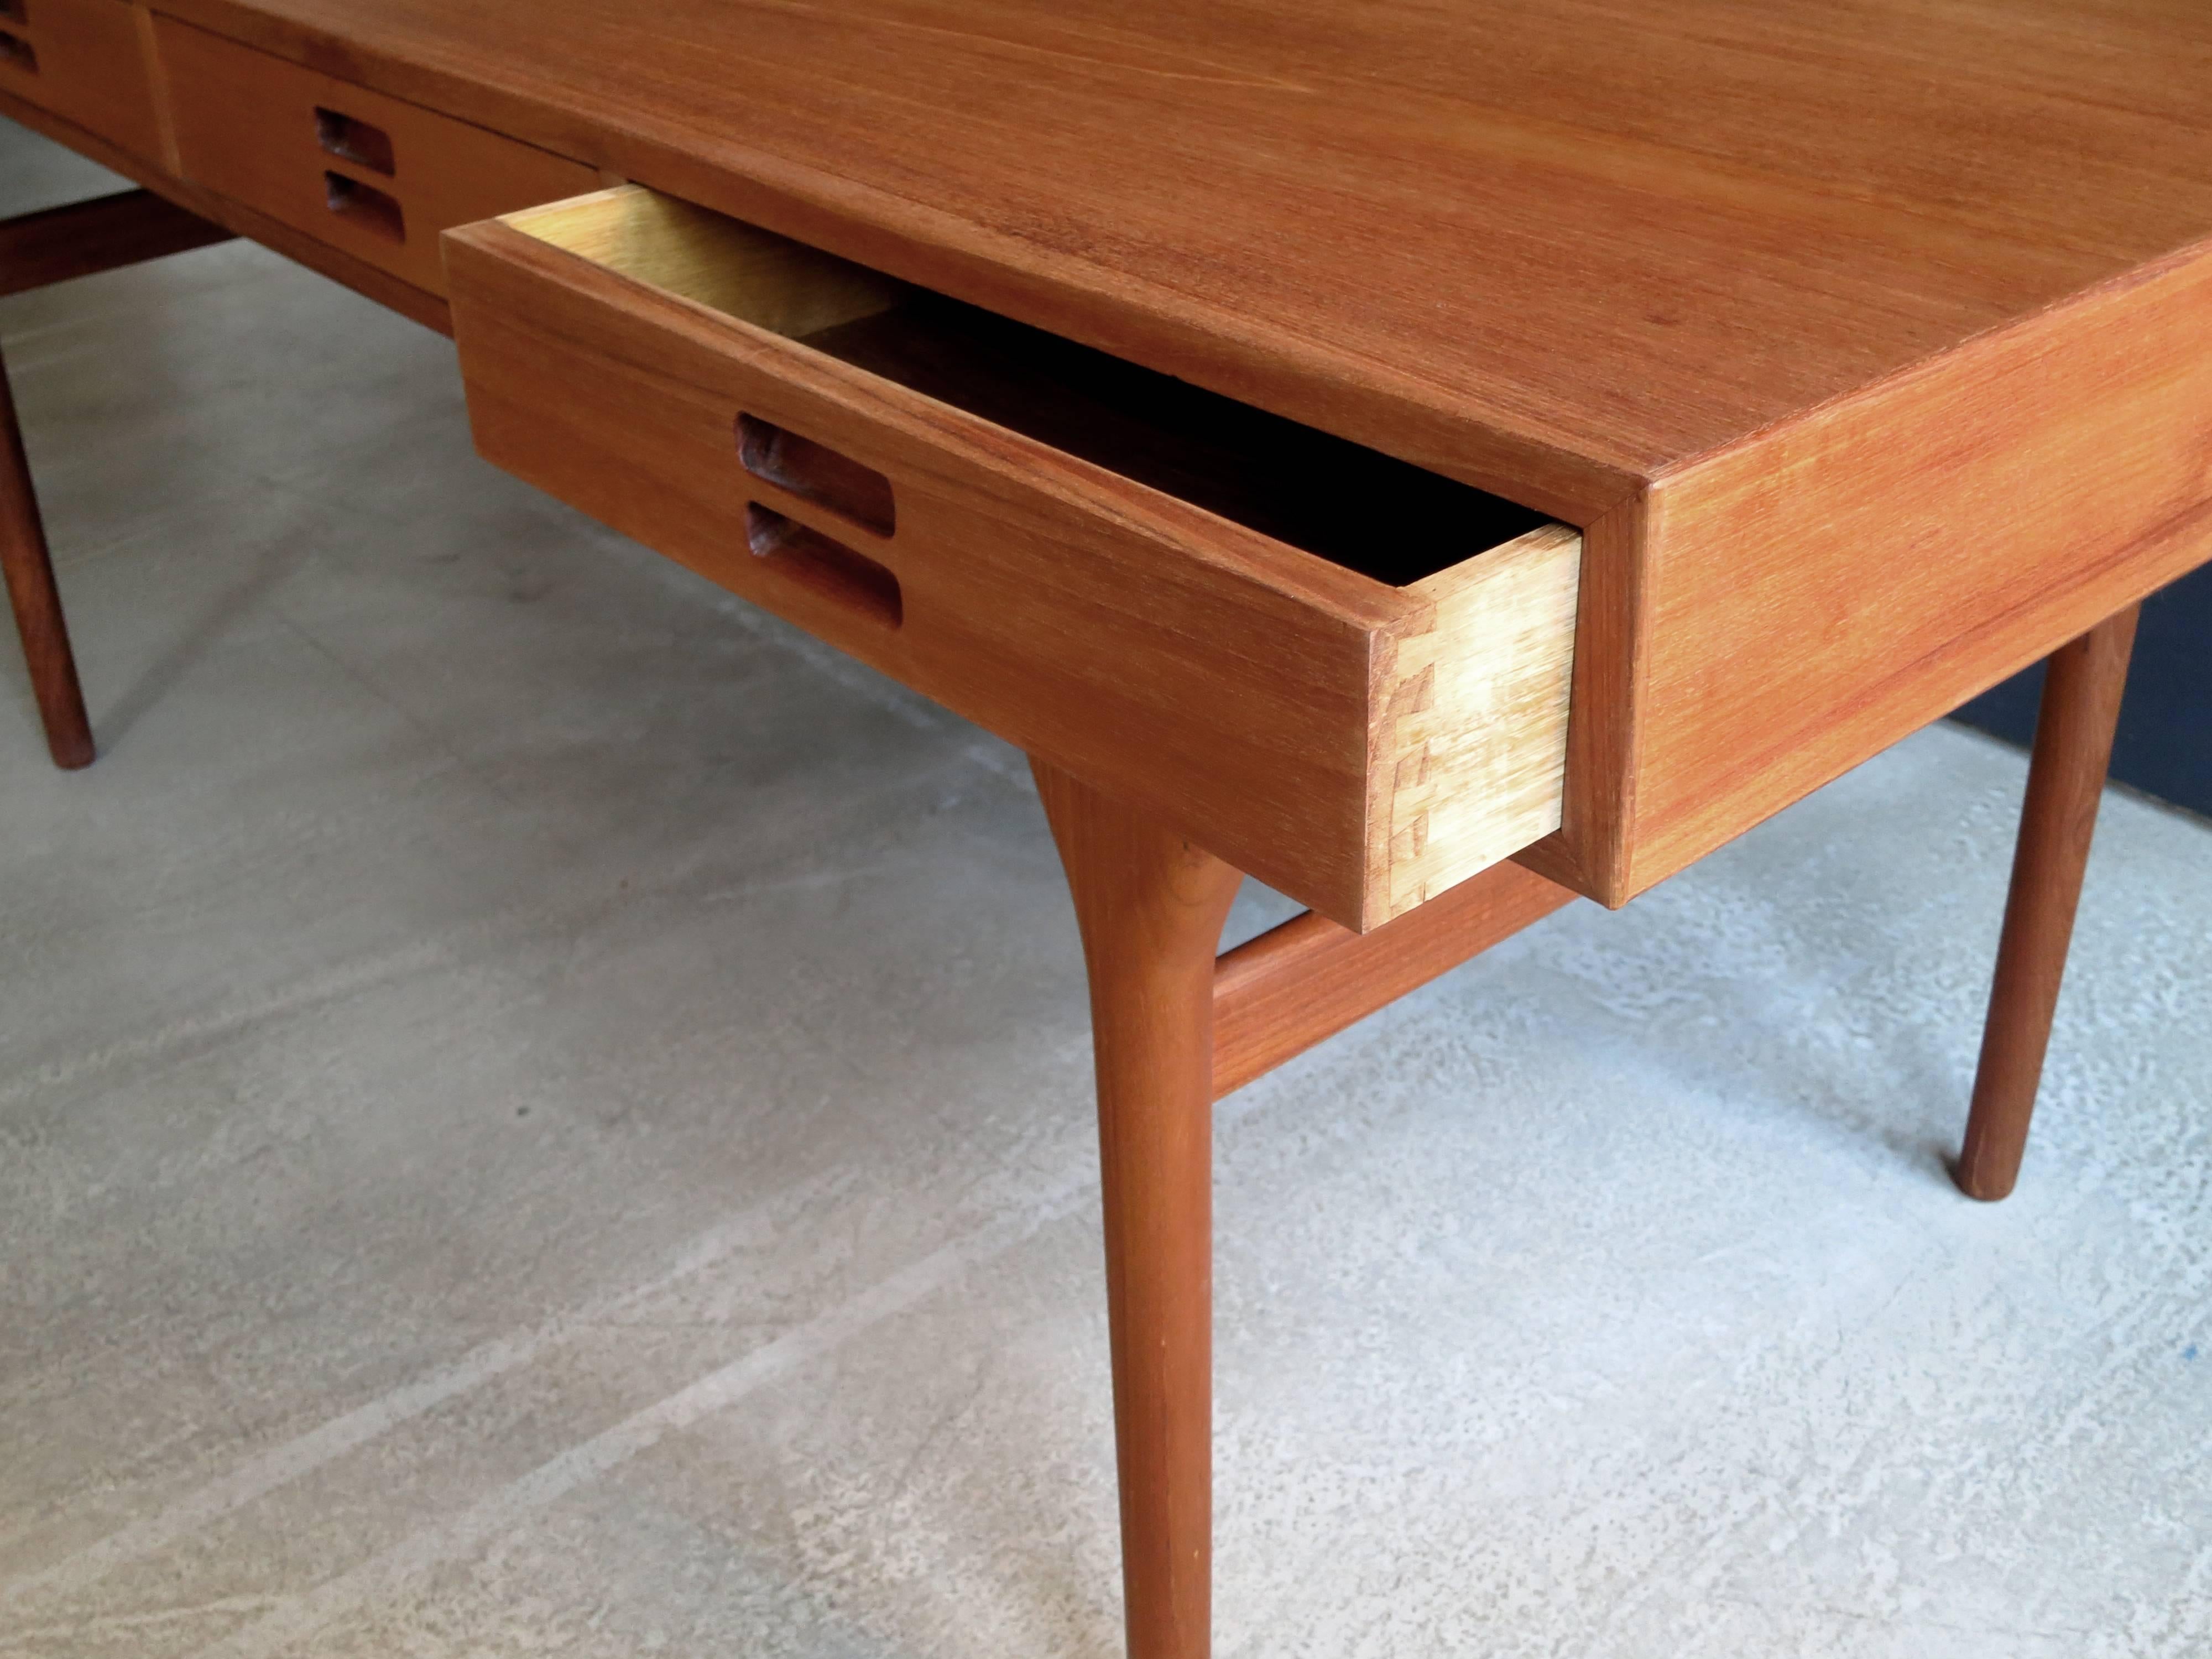 Modernist Freestanding Teak Desk with Four Drawers by Nanna and Jørgen Ditzel In Excellent Condition For Sale In New York, NY